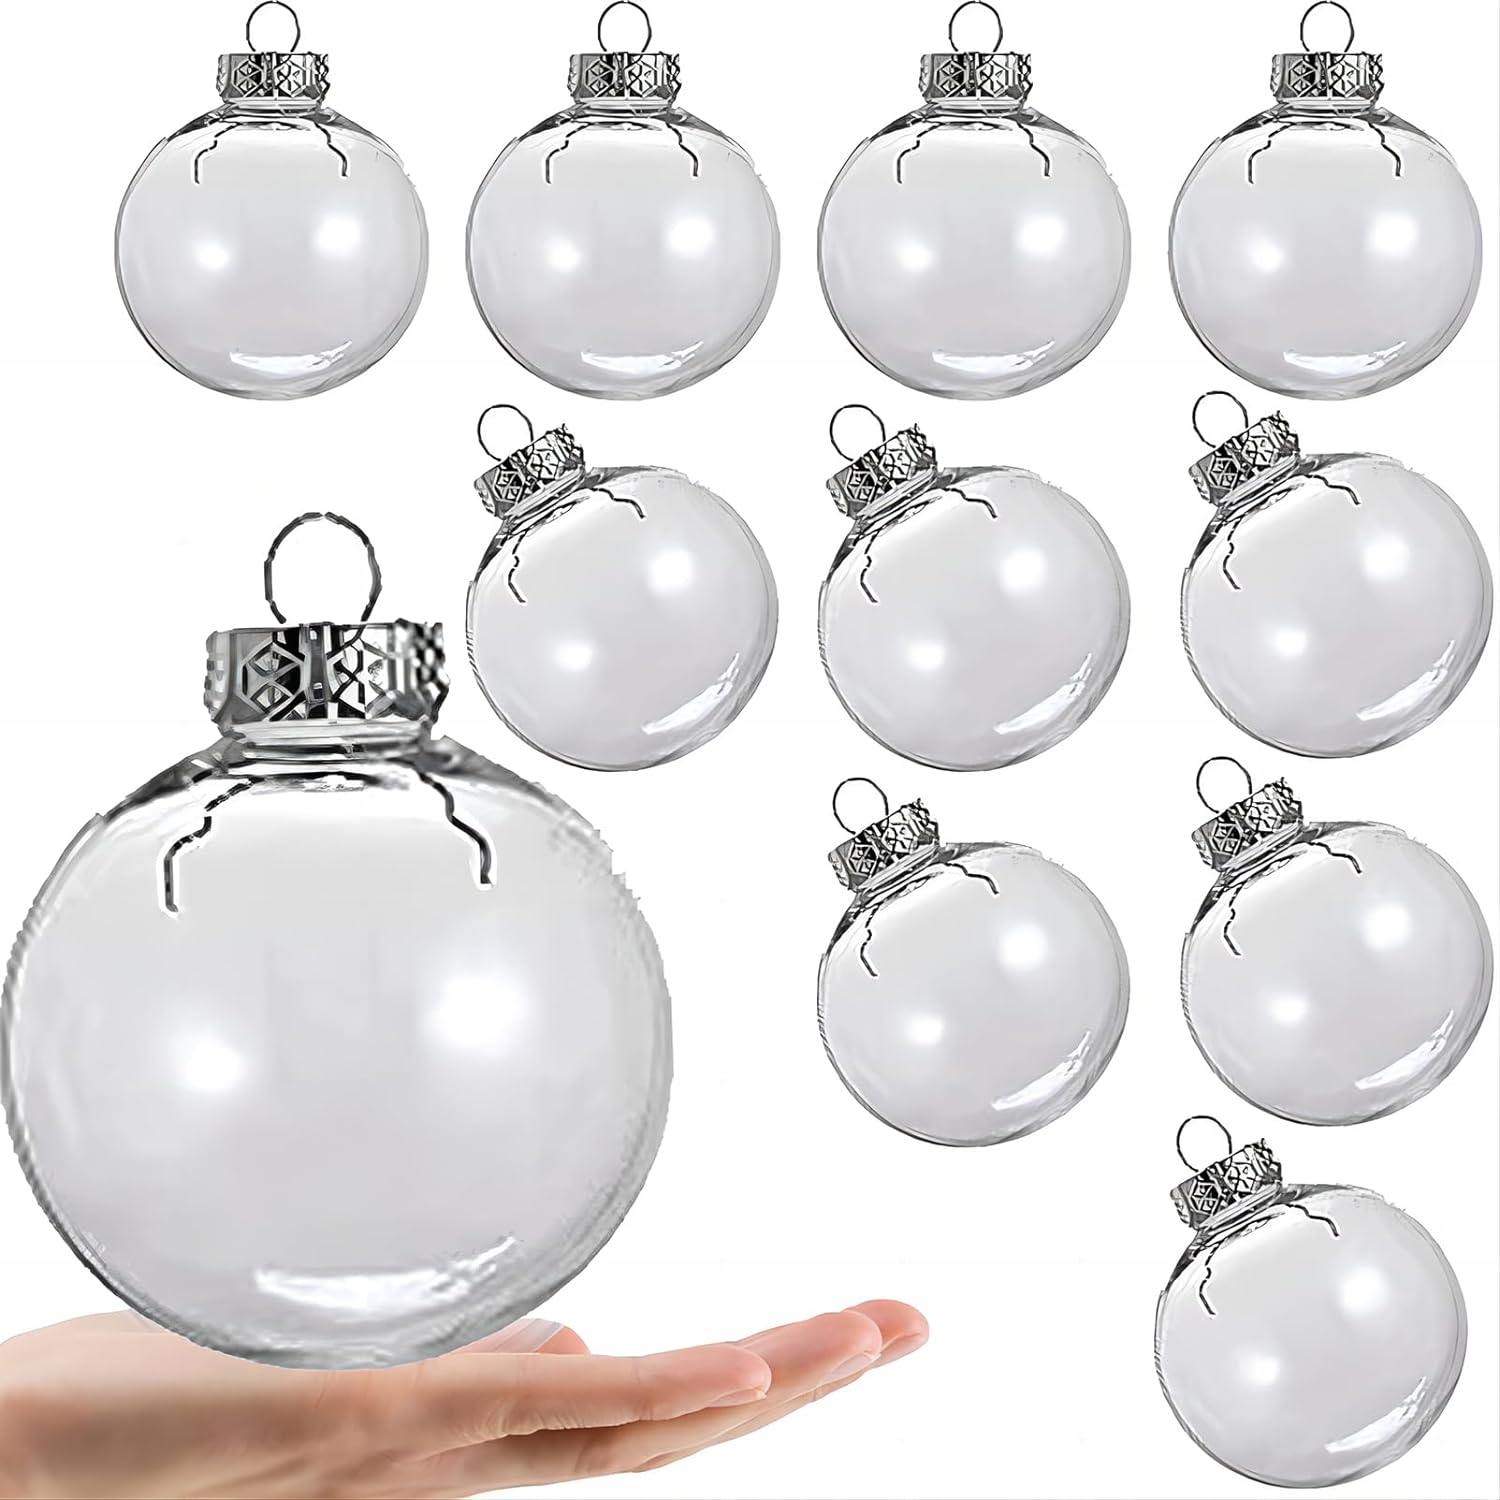 60 Pieces Clear Flat Ball Christmas Ornaments 3.15 Inch Plastic Fillable  Hanging